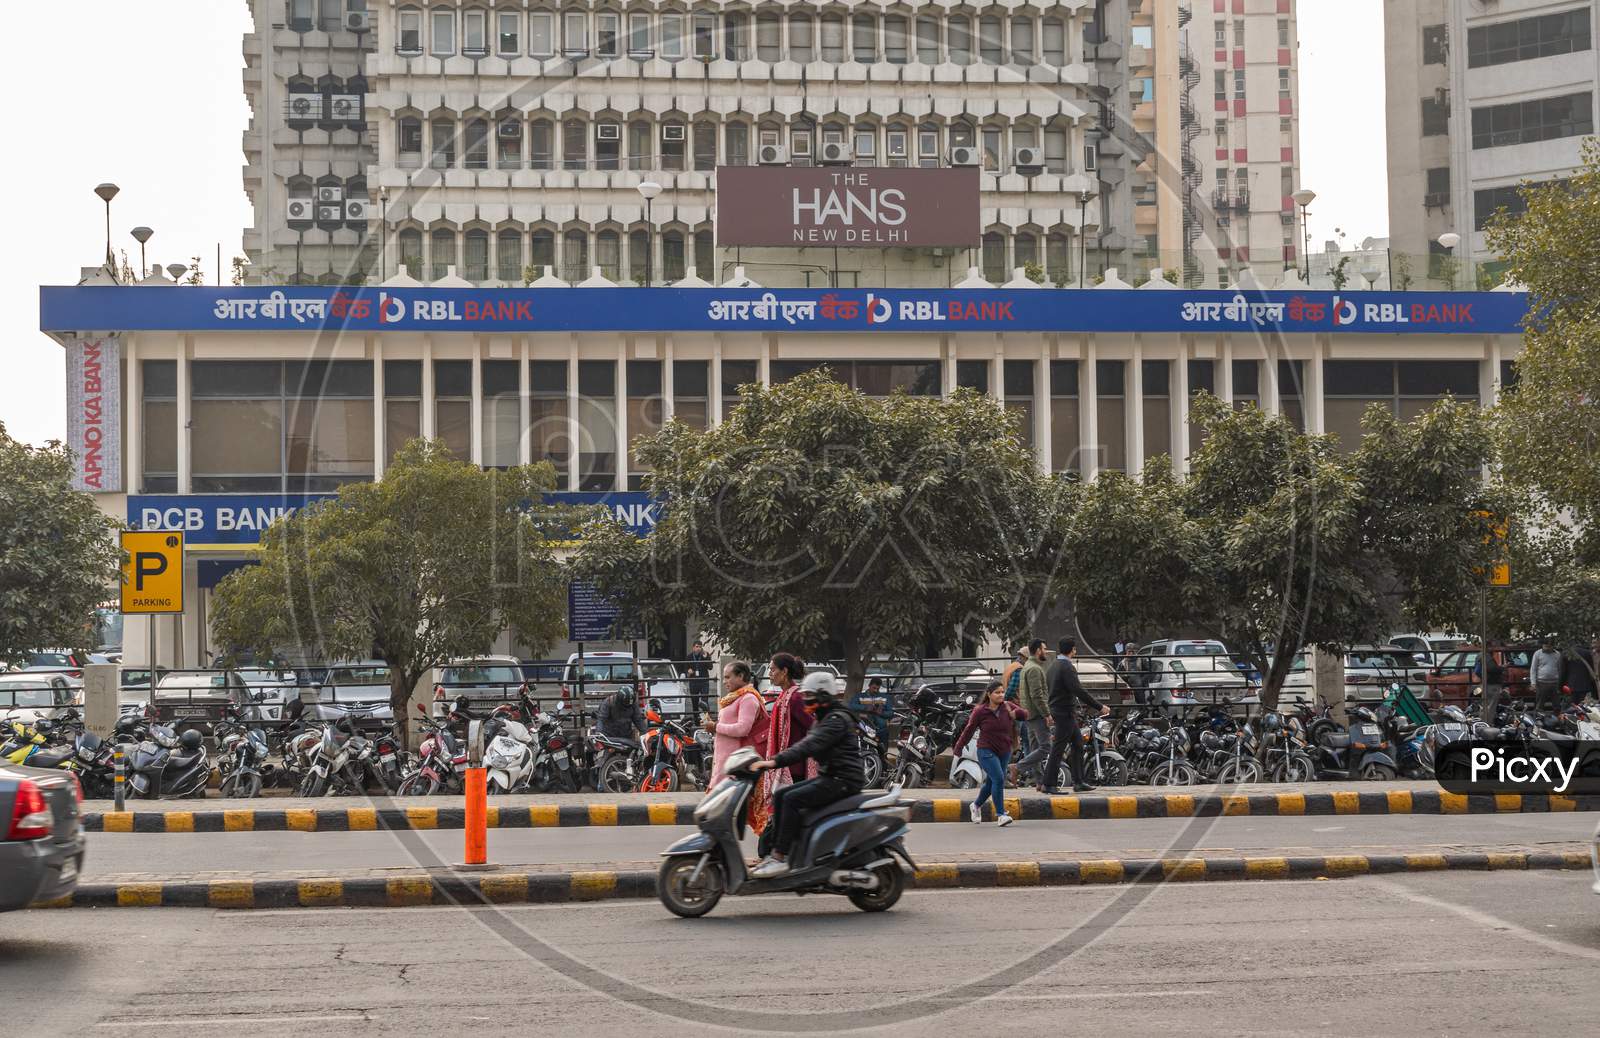 RBL Bank near connaught place